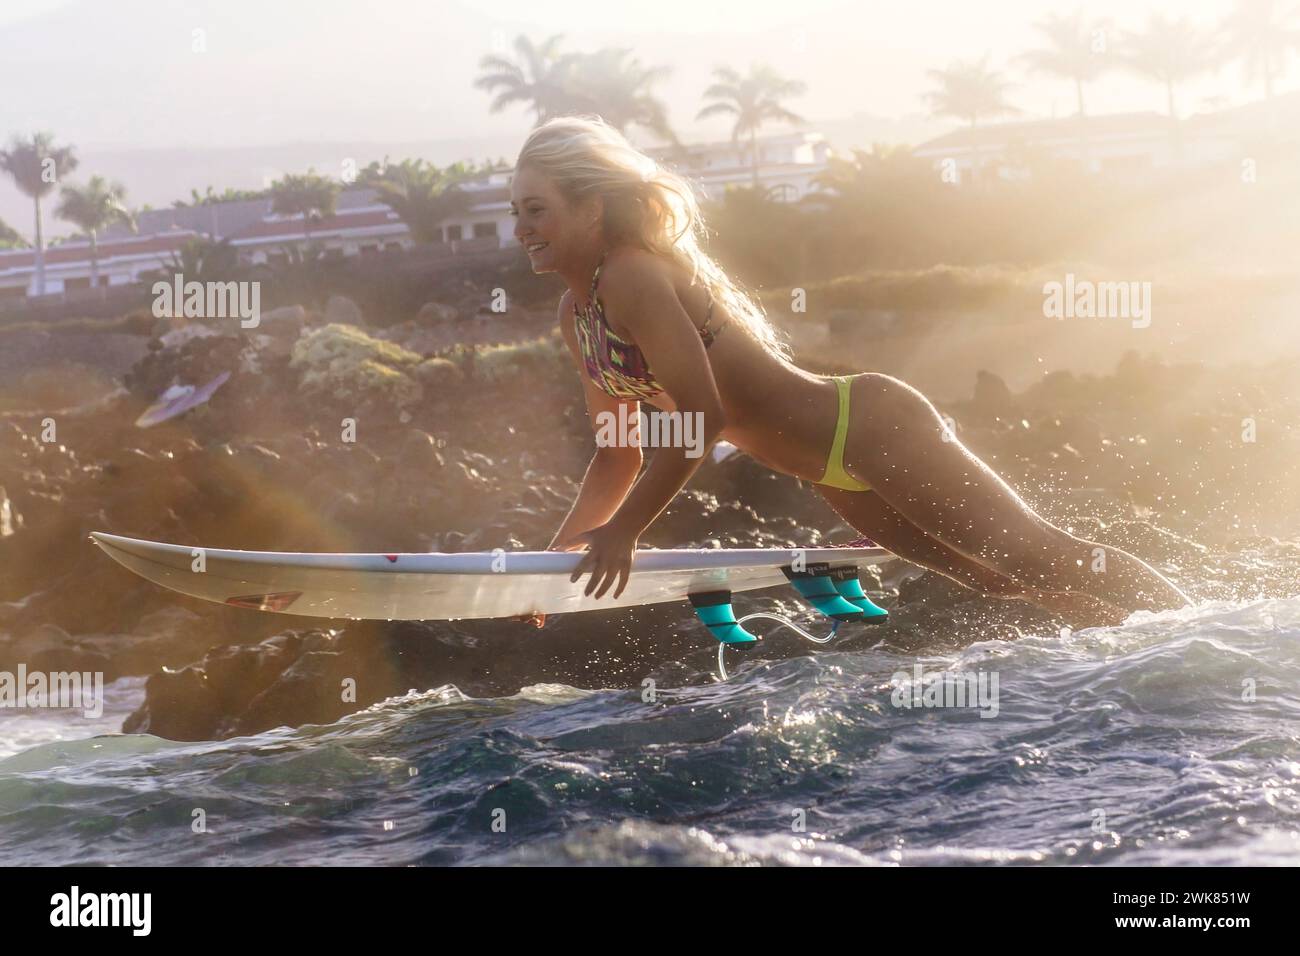 A Female Surfer In A Bikini Jumps Into The Water With Her Surfboard Stock Photo